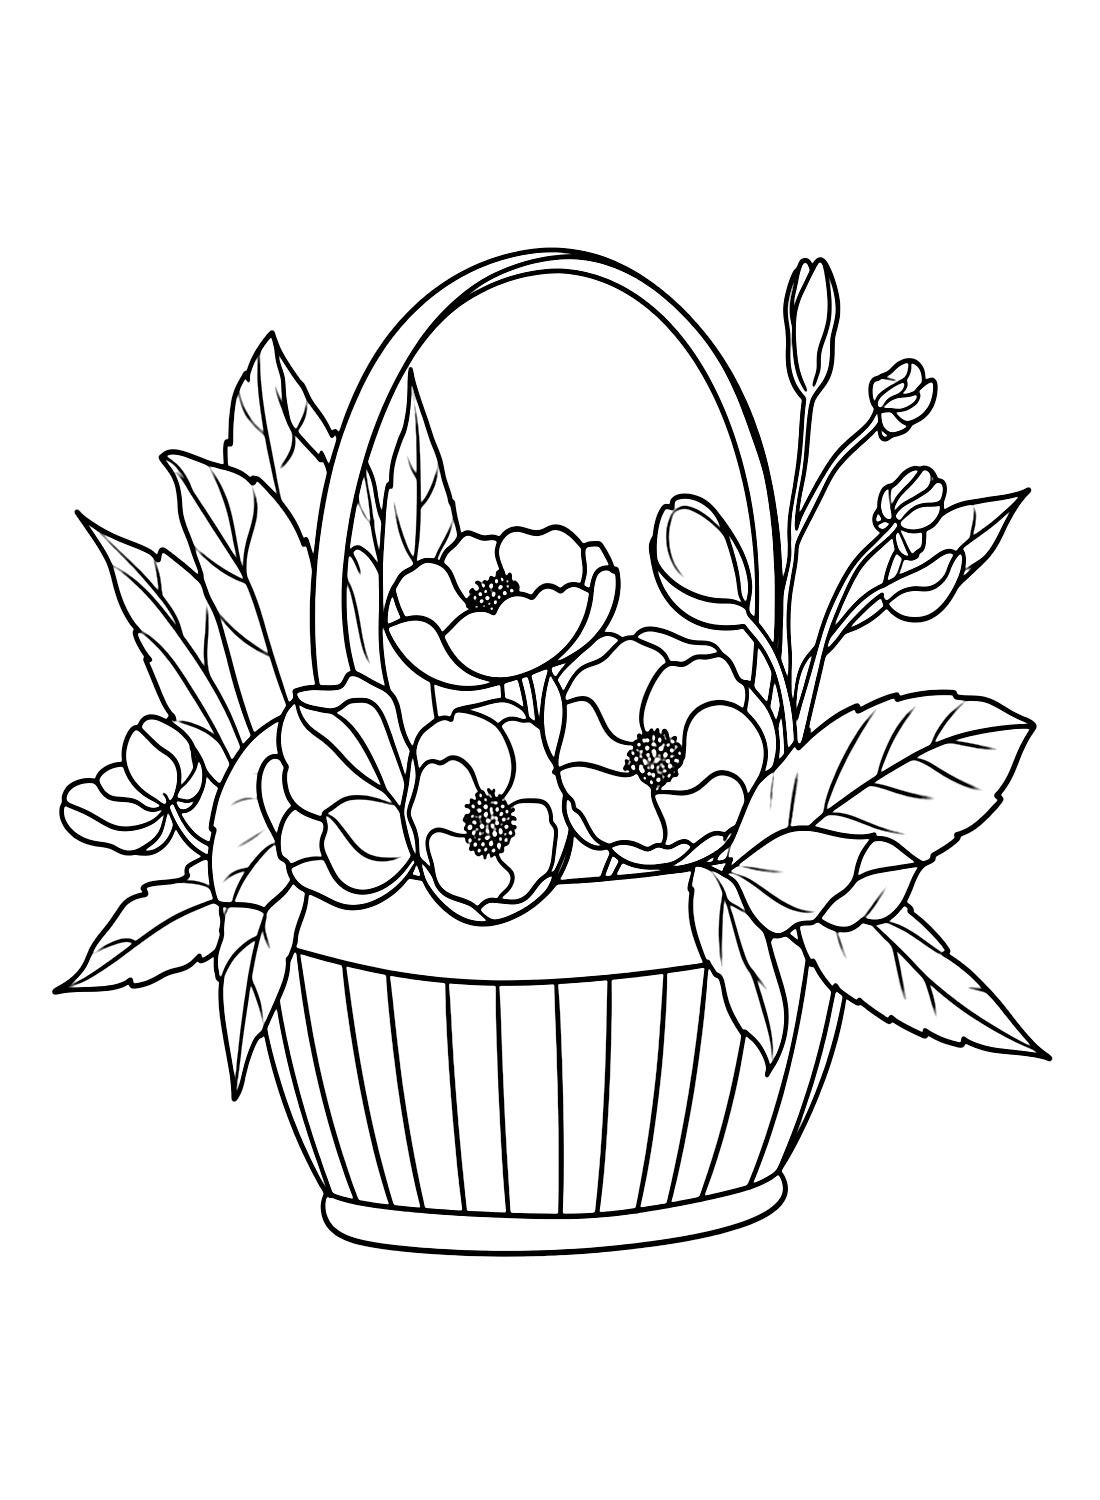 Lovely Flower Baskets Coloring Page